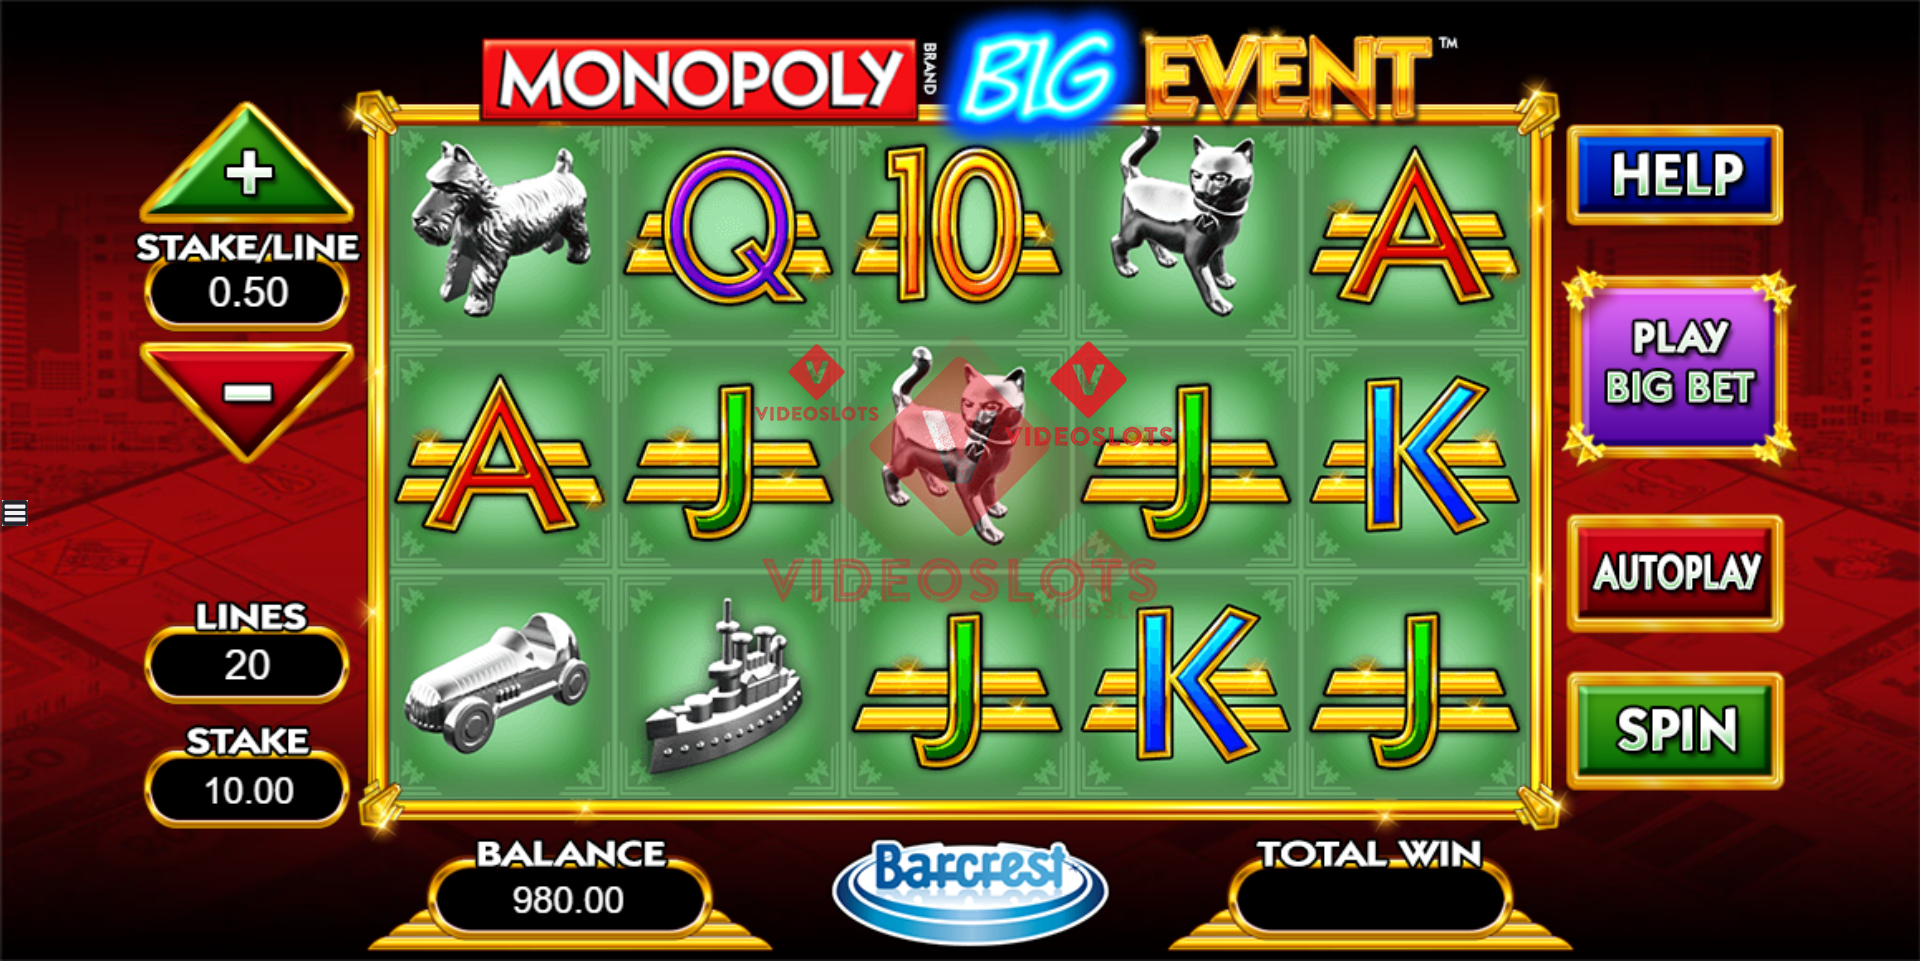 Base Game for Monopoly Big Event slot from Barcrest